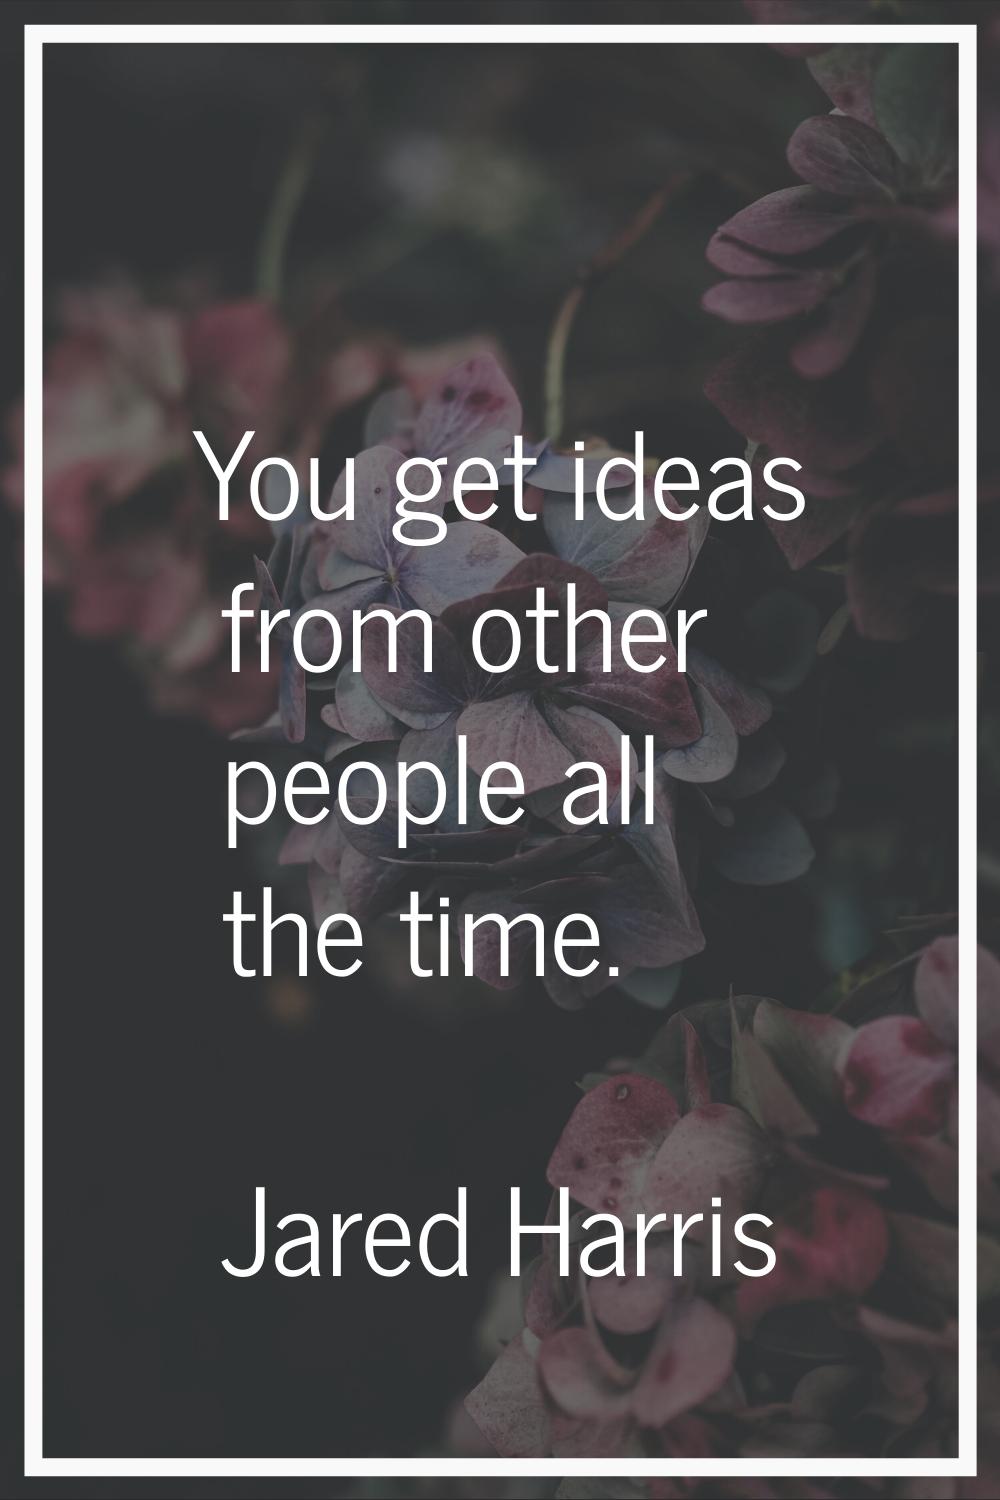 You get ideas from other people all the time.